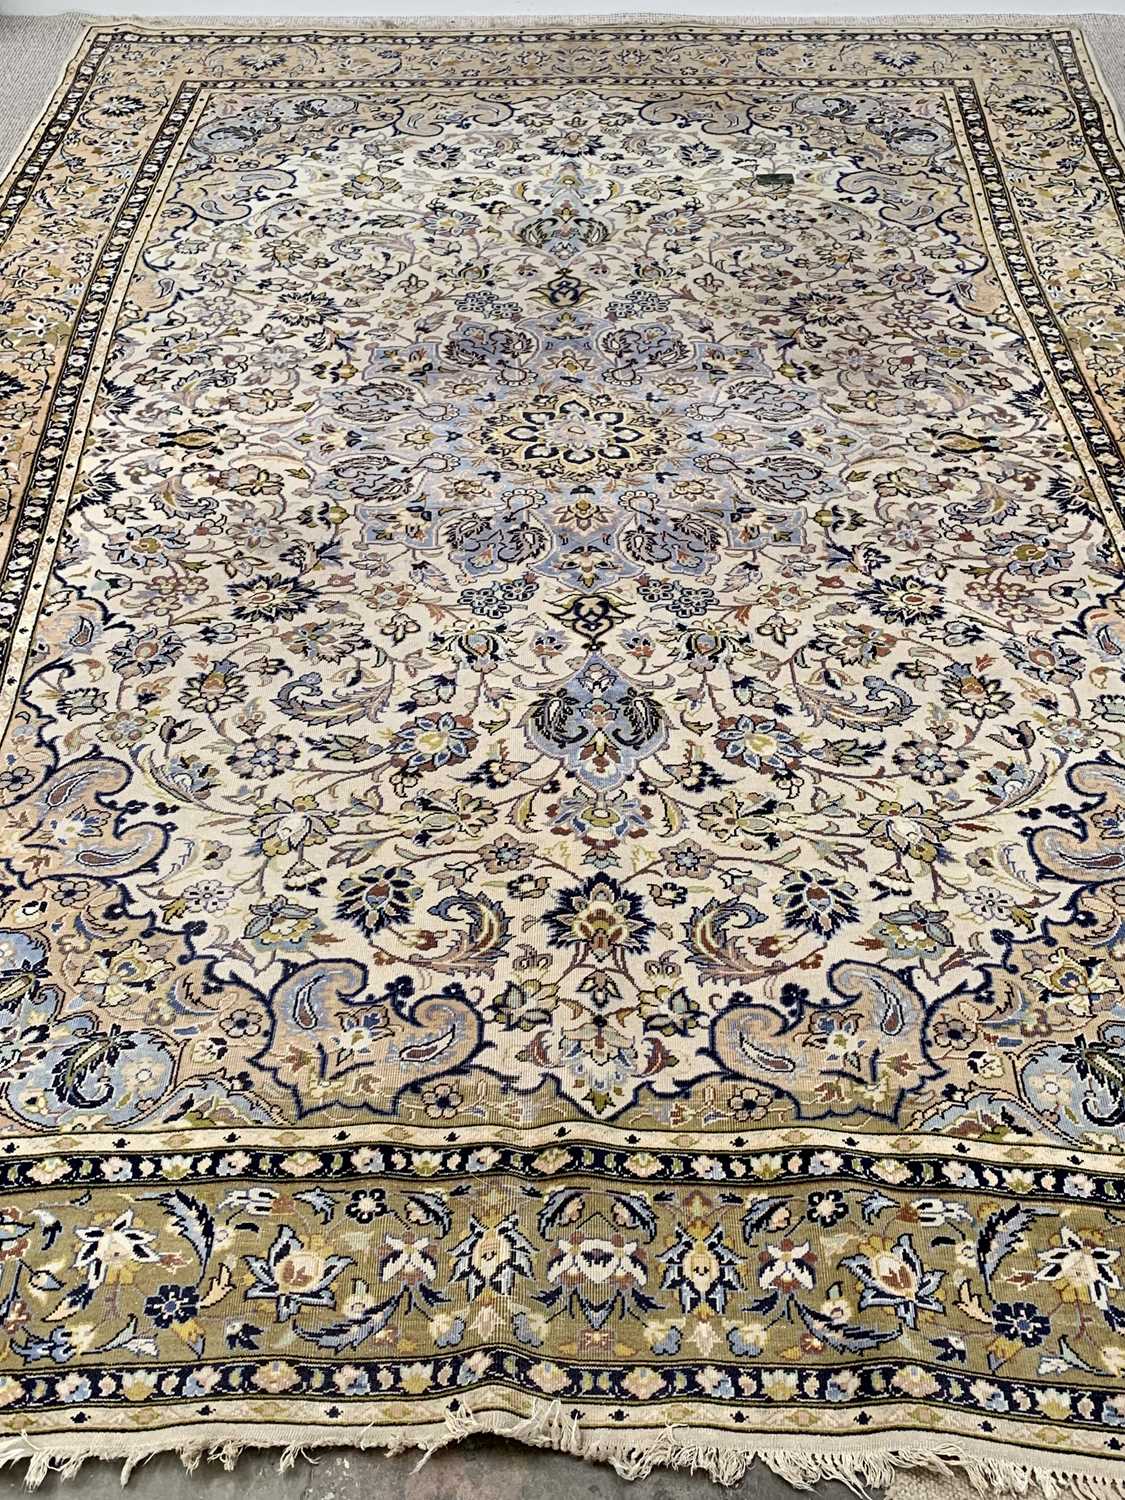 LARGE EASTERN STYLE RUG - multiple bordered with tasselled ends, mainly beige and blue ground with